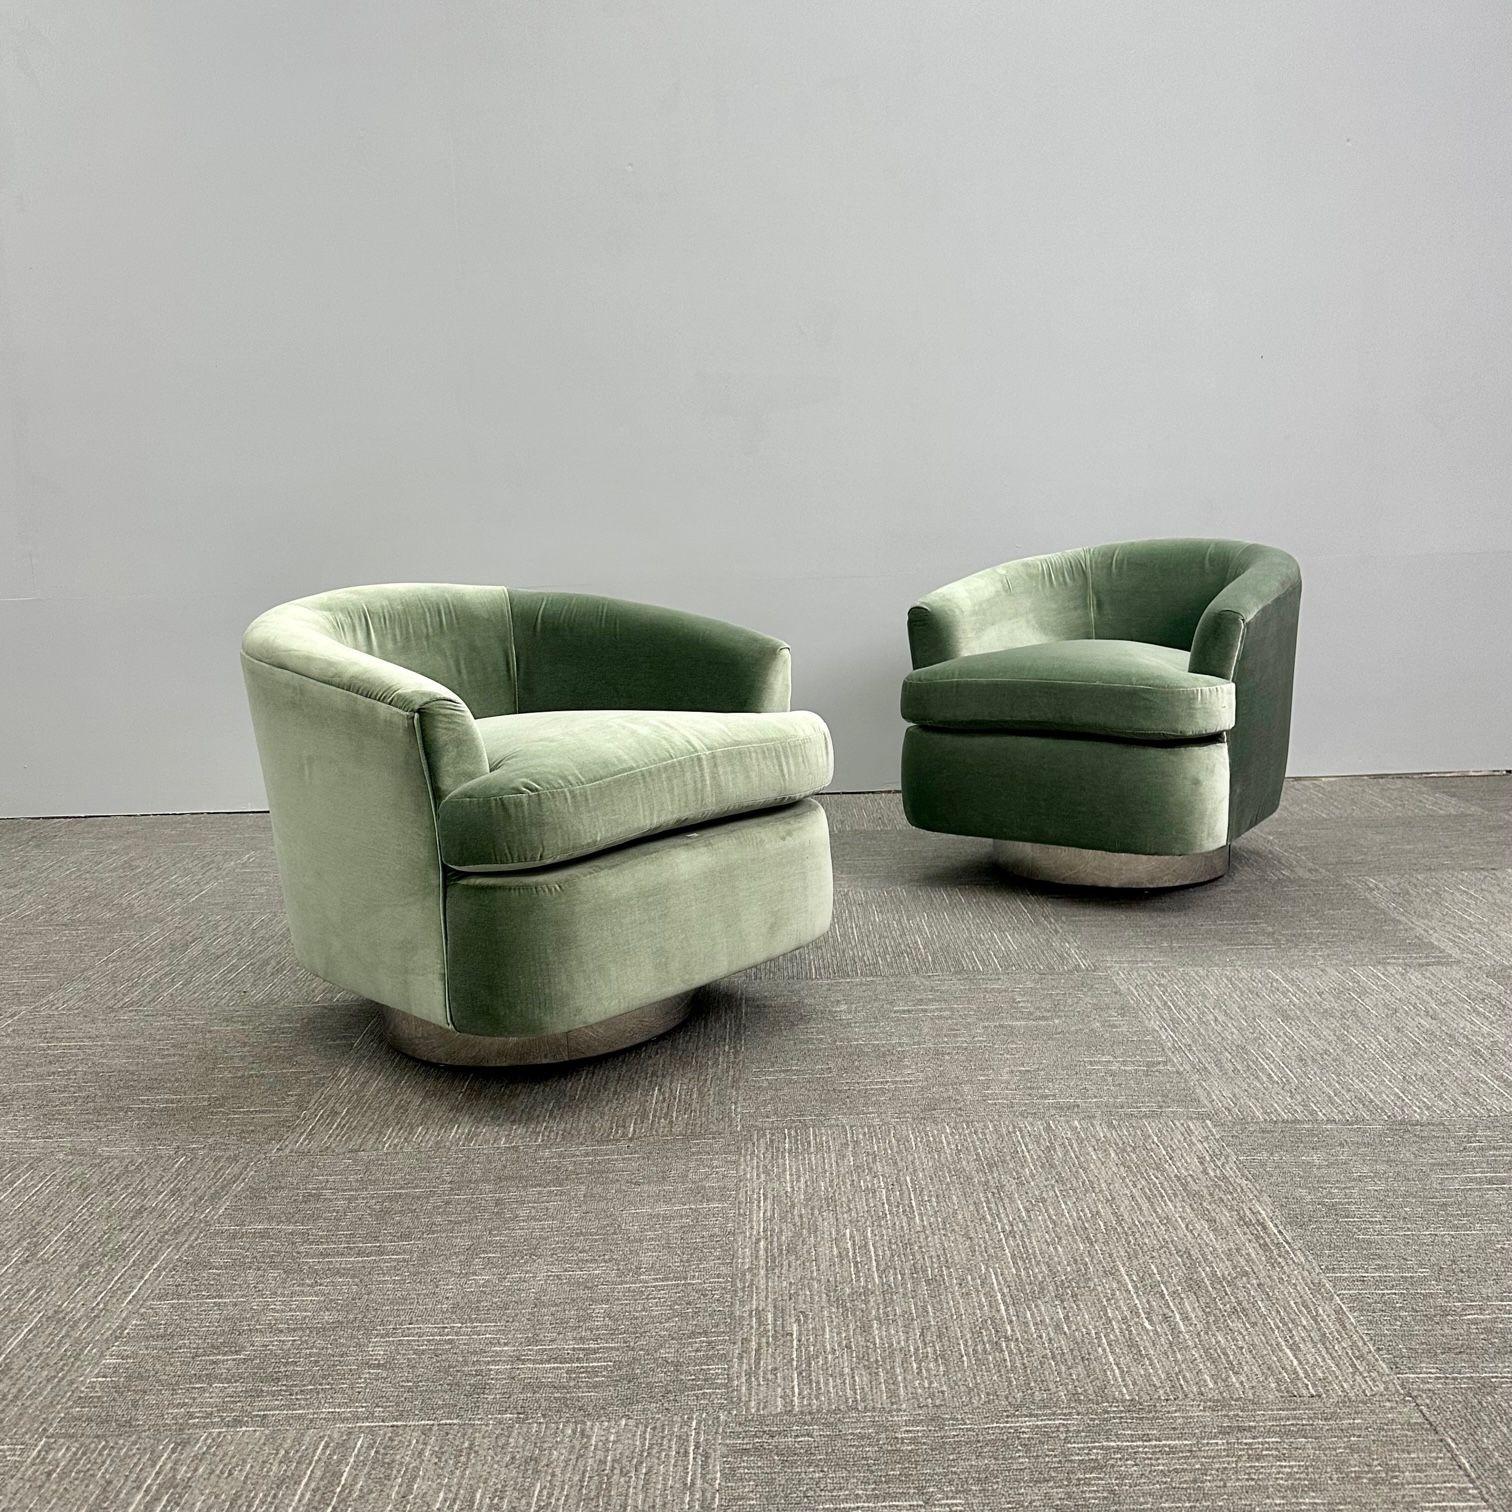 Mid-Century Modern Milo Baughman Style Swivel Chairs, Chrome Base, Green Velvet
 
Pair of hand crafted modern Milo Baughman inspired swivel chairs having a chrome finished base and soft green velvet upholstery. This chair sits about 3 inches off the